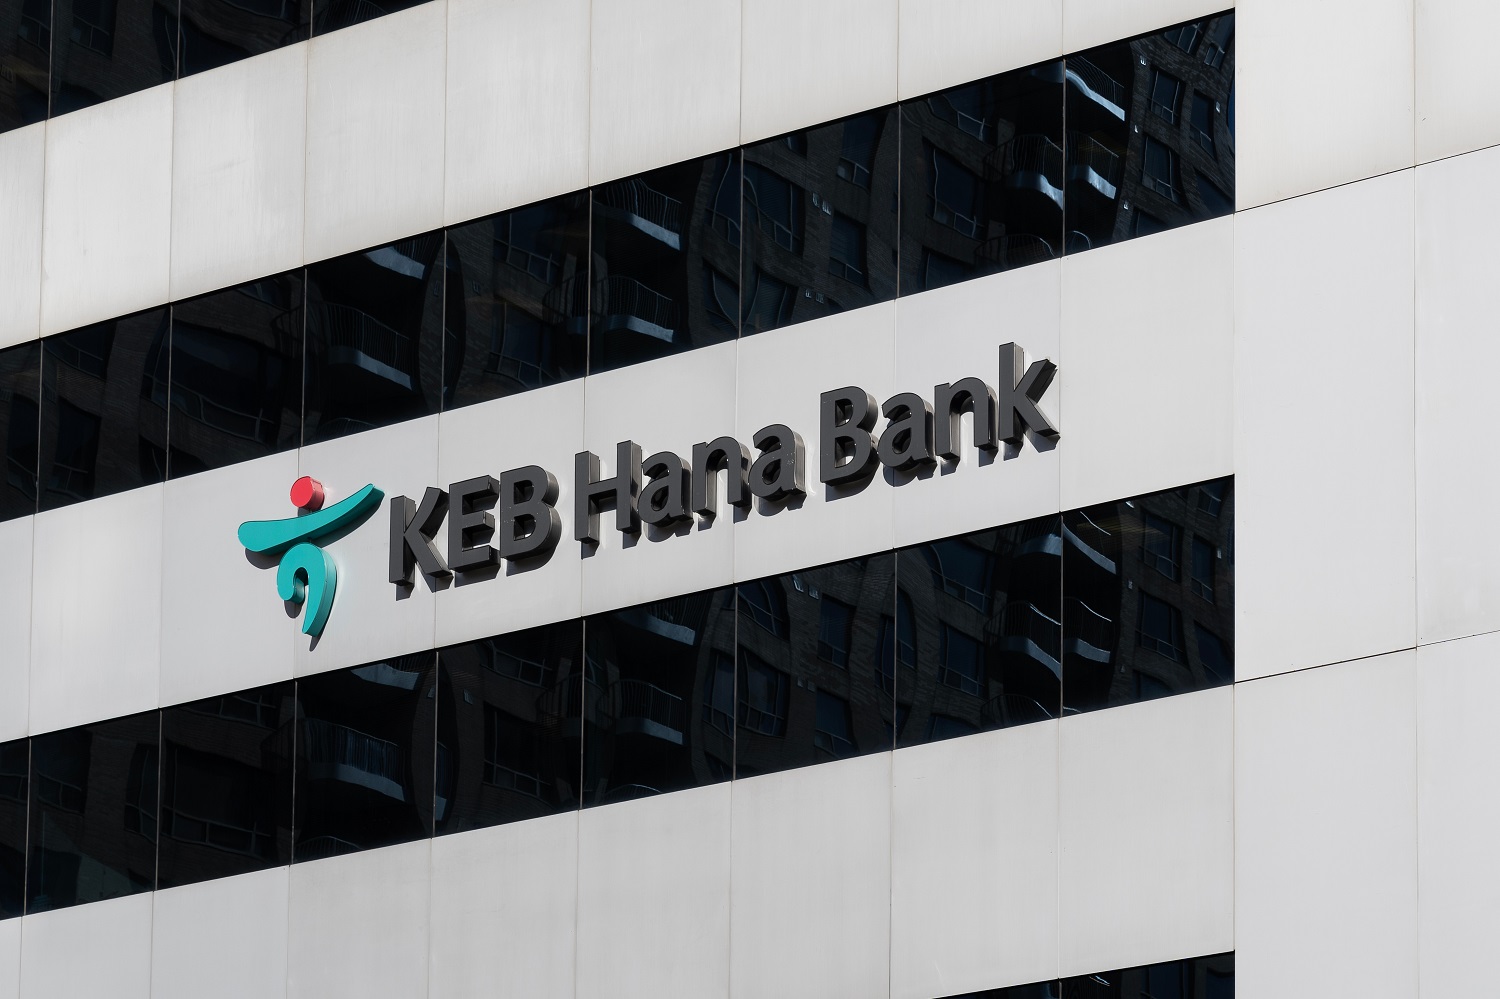 A KEB Hana Bank sign on the side of a building.